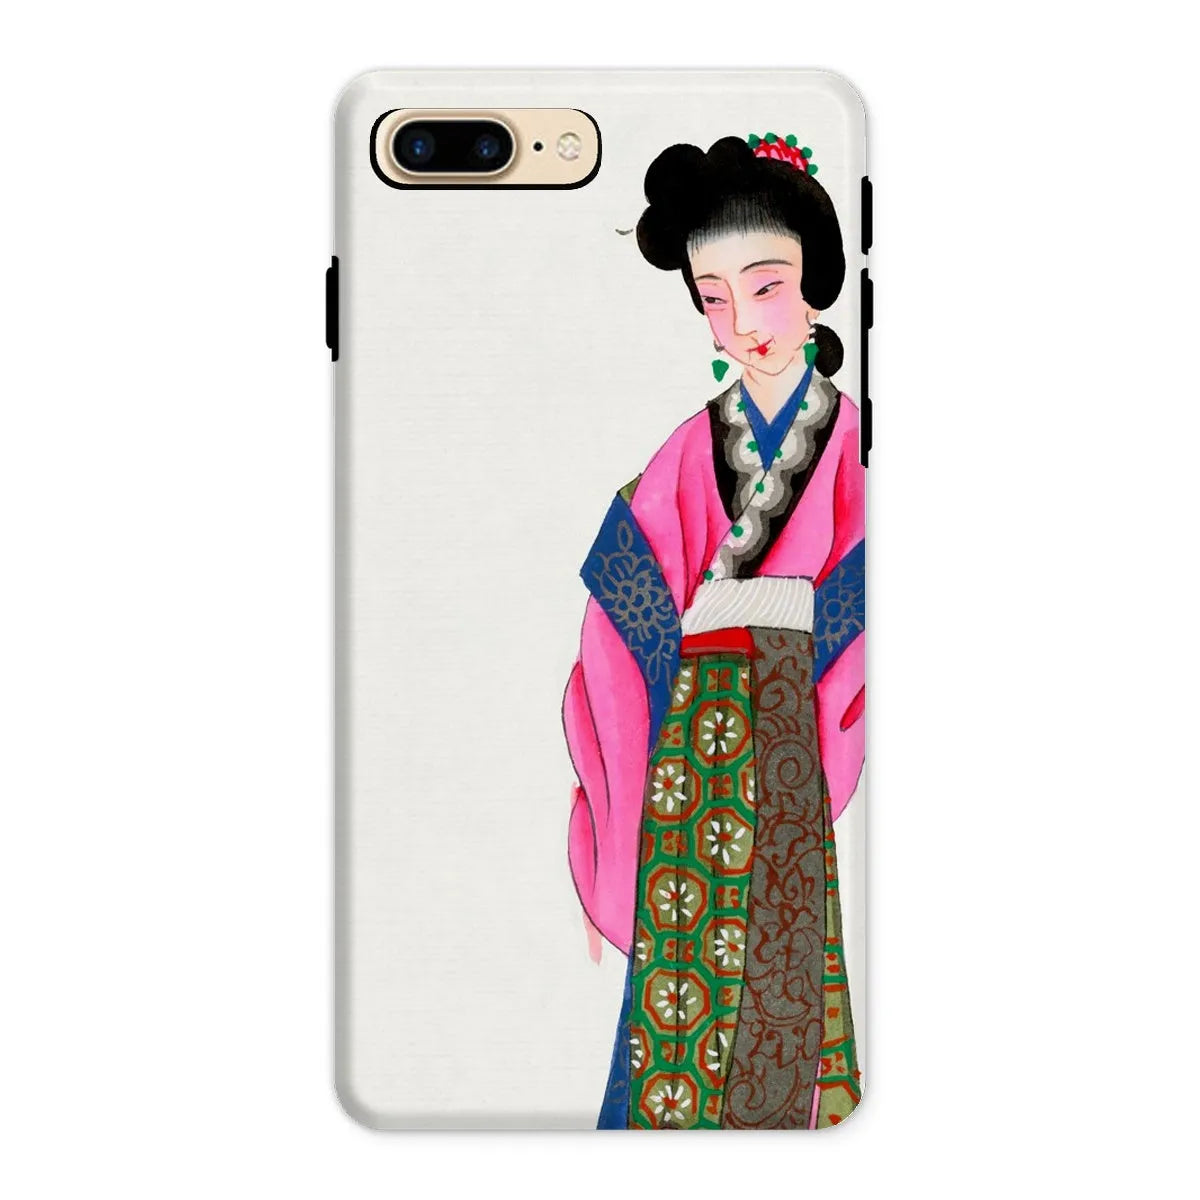 Noblewoman - Chinese Aesthetic Manchu Art Phone Case - Iphone 8 Plus / Matte - Mobile Phone Cases - Aesthetic Art